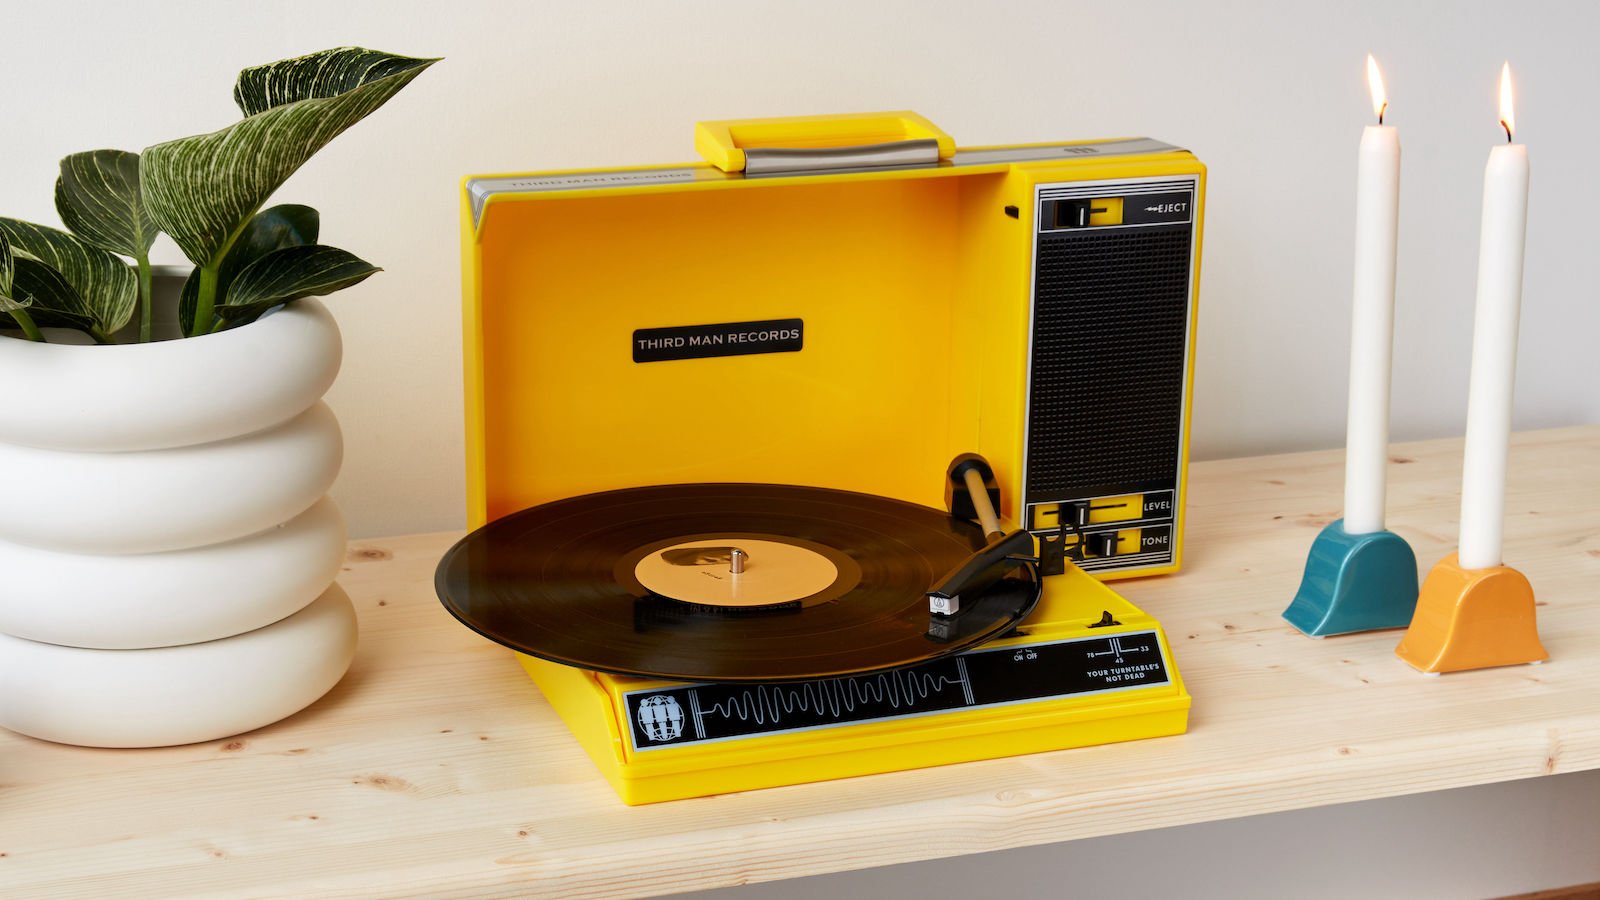 Third Man Records Spinnerette Turntable has a retro vibe and a carry handle to go anywhere